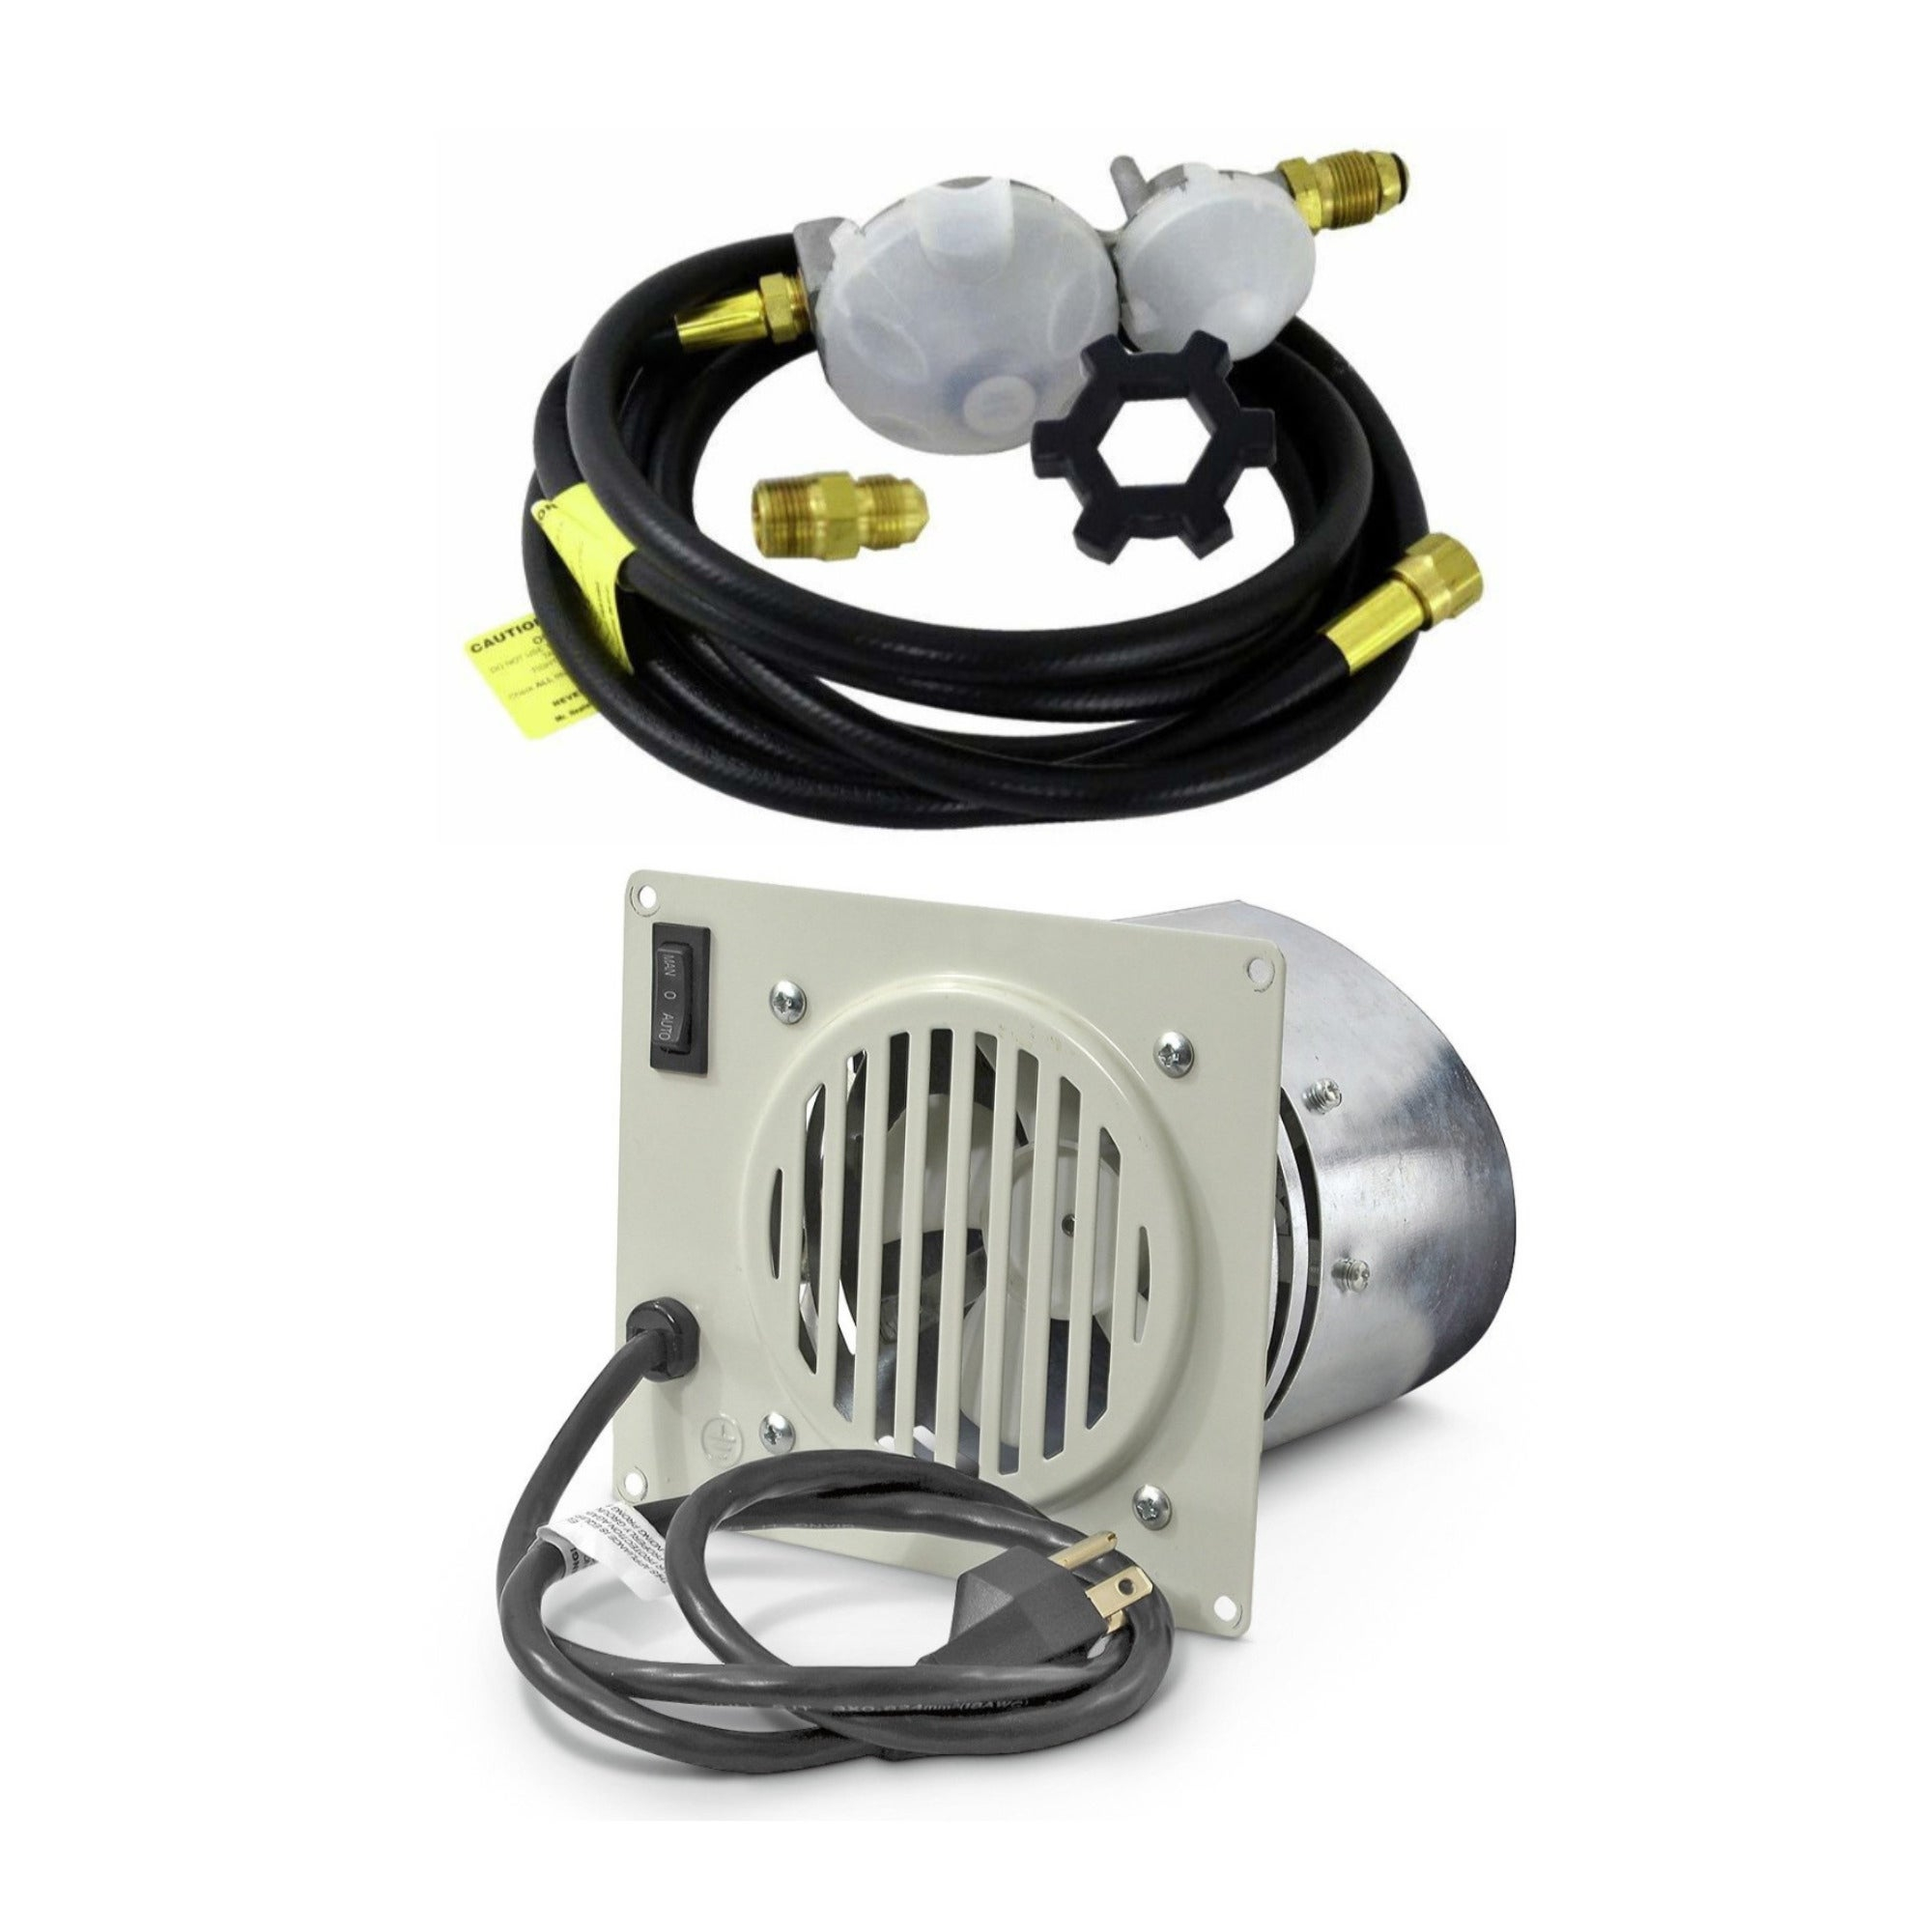 Mr Heater Vent Free Blower Fan Kit With Regulator Accessory Bundle throughout dimensions 2000 X 2000